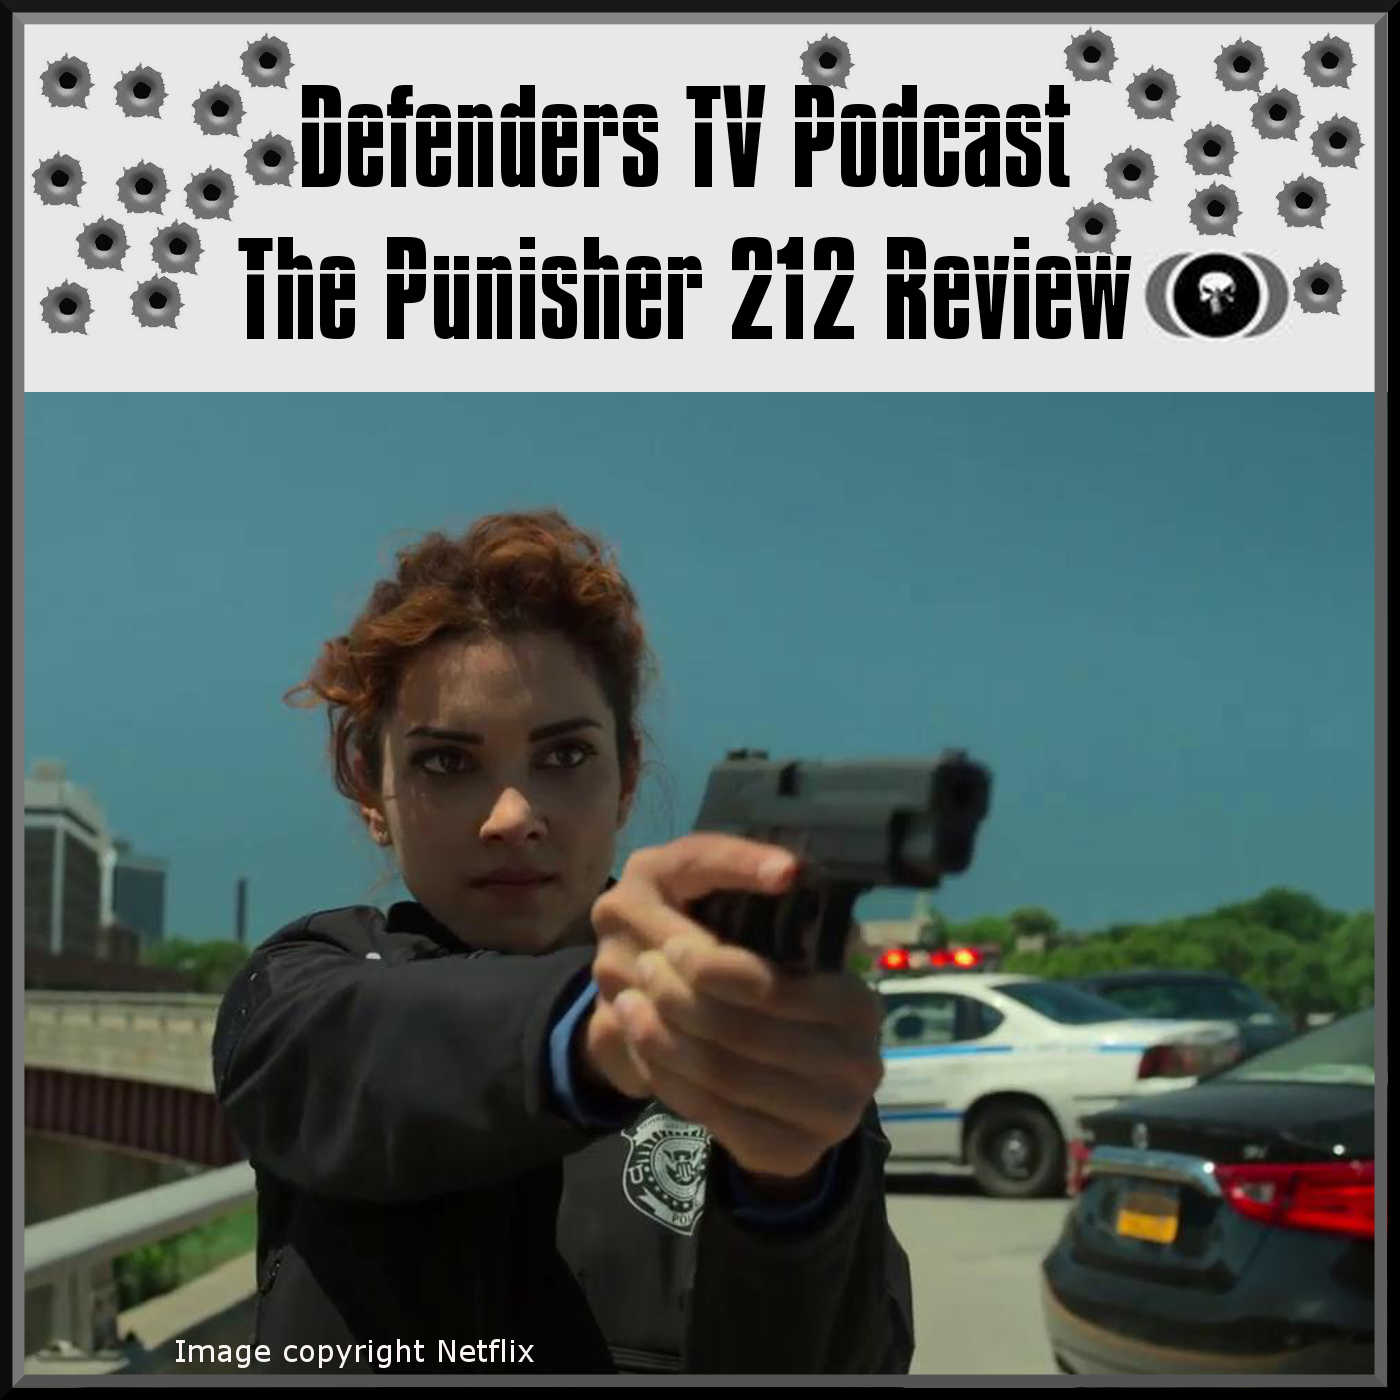 Punisher Season 2 Episode 12 ”Collision Course” by TV Podcast Industries